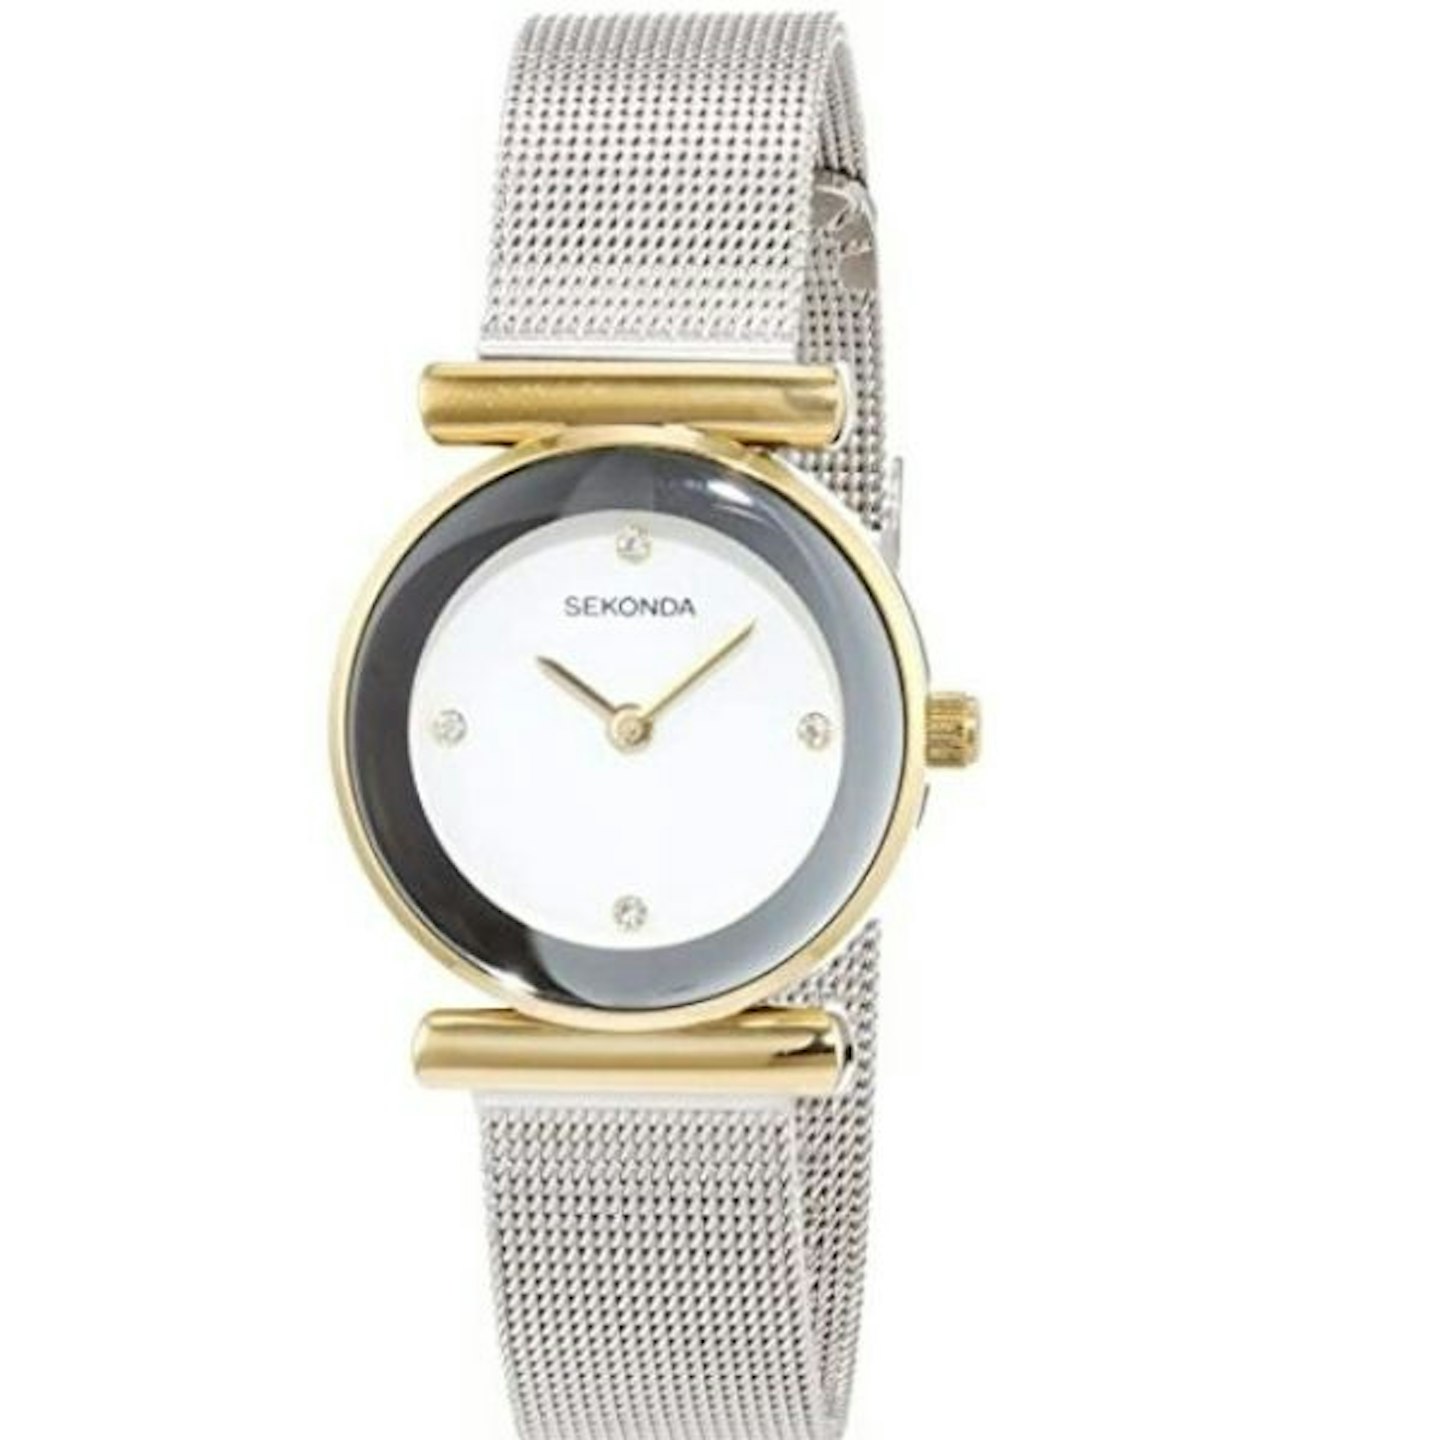 Silver and gold watch